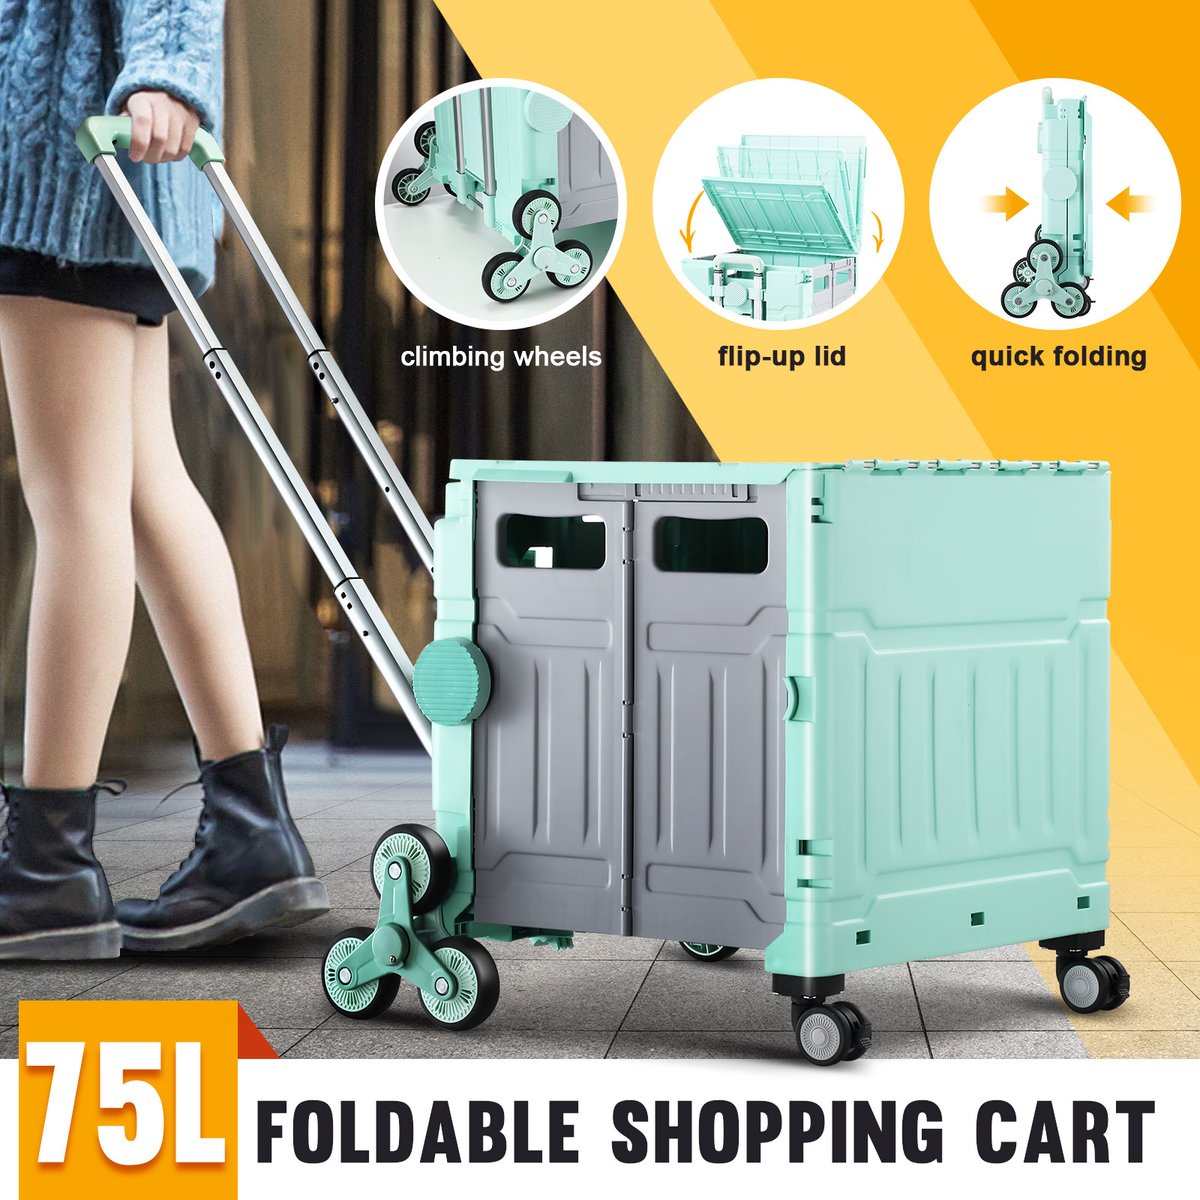 Foldable Shopping Cart Trolley Grocer Rolling Utility Luggage Bag Market Travel Shop Moving Stair Climbing Wheels 75L bit.ly/3qhp7Vf #shoppingcart #trolley #grocery #utility #luggage #shop #market